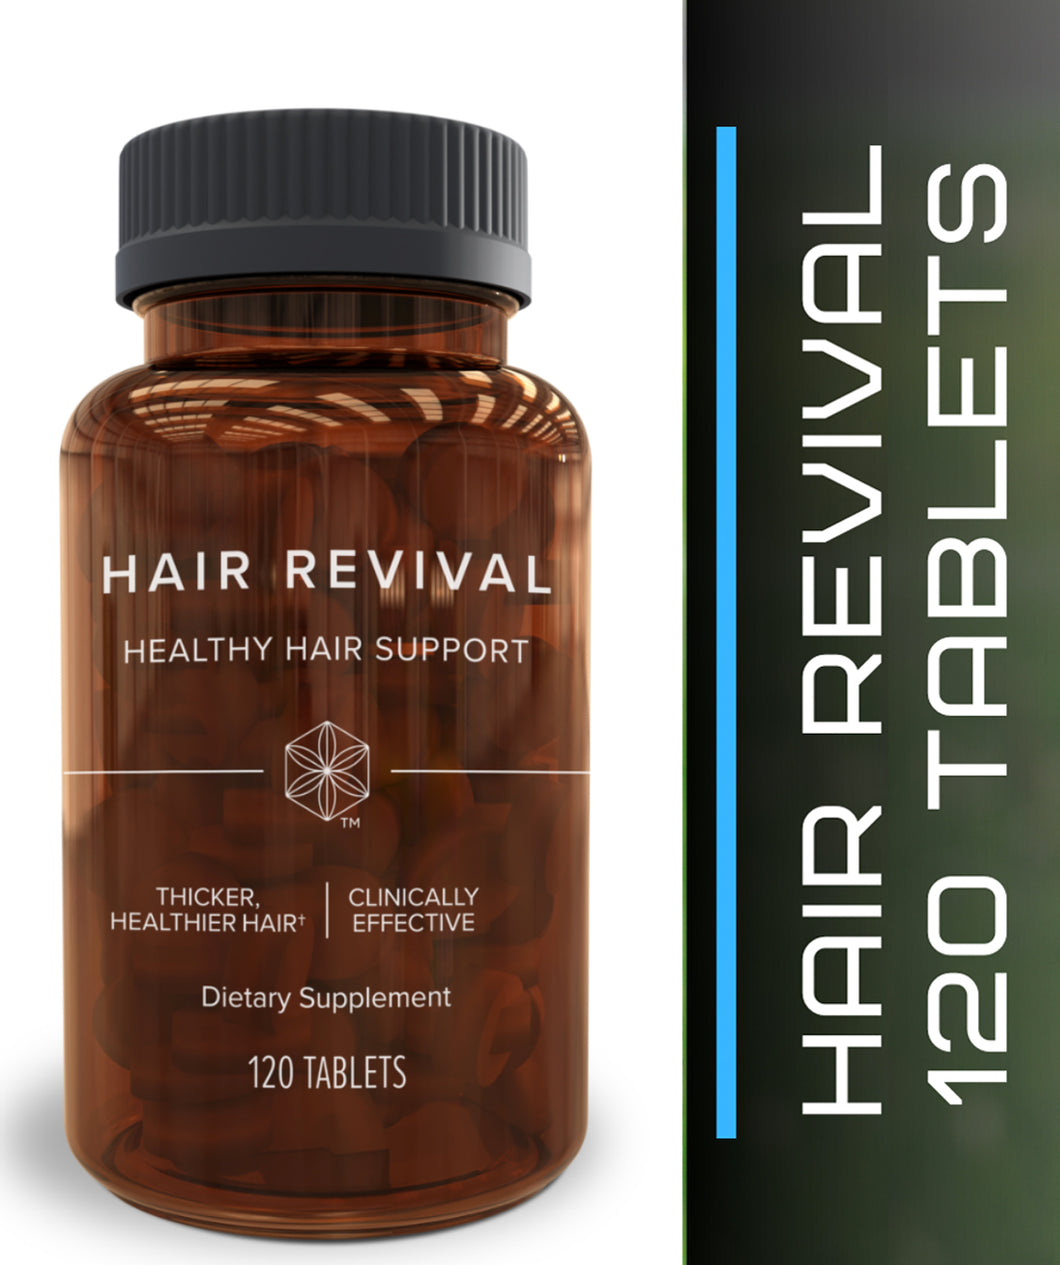 Hair Revival All Natural Vitamin **IF ORDERING MORE THAN 1, GIVE US A CALL 641-745-0323 TO GET IT CHEAPER